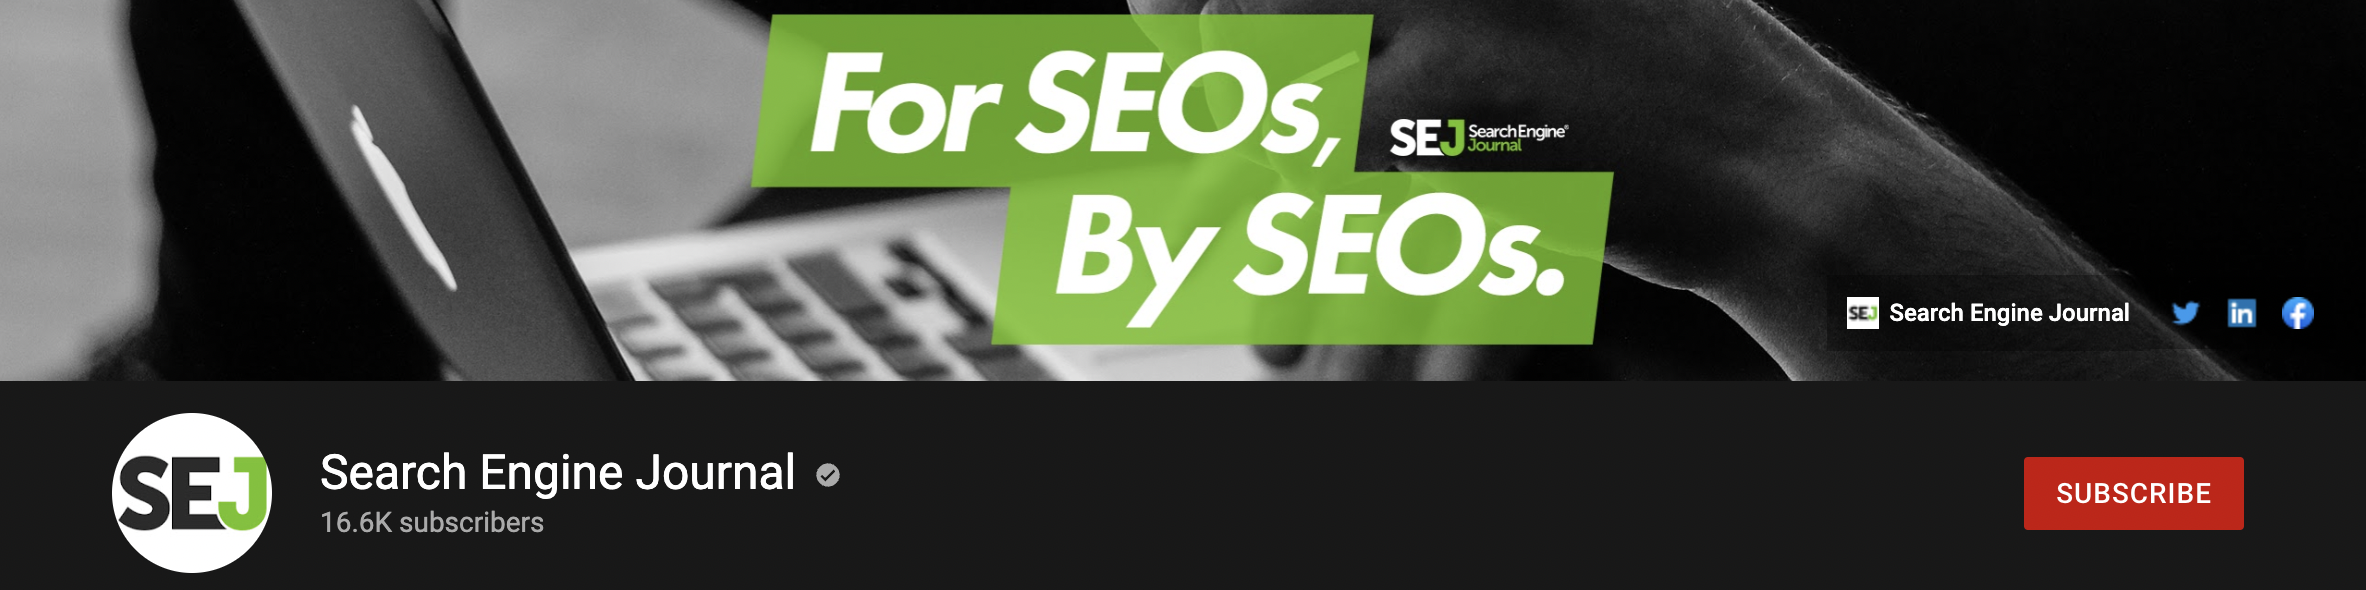 SEJ Youtube home page